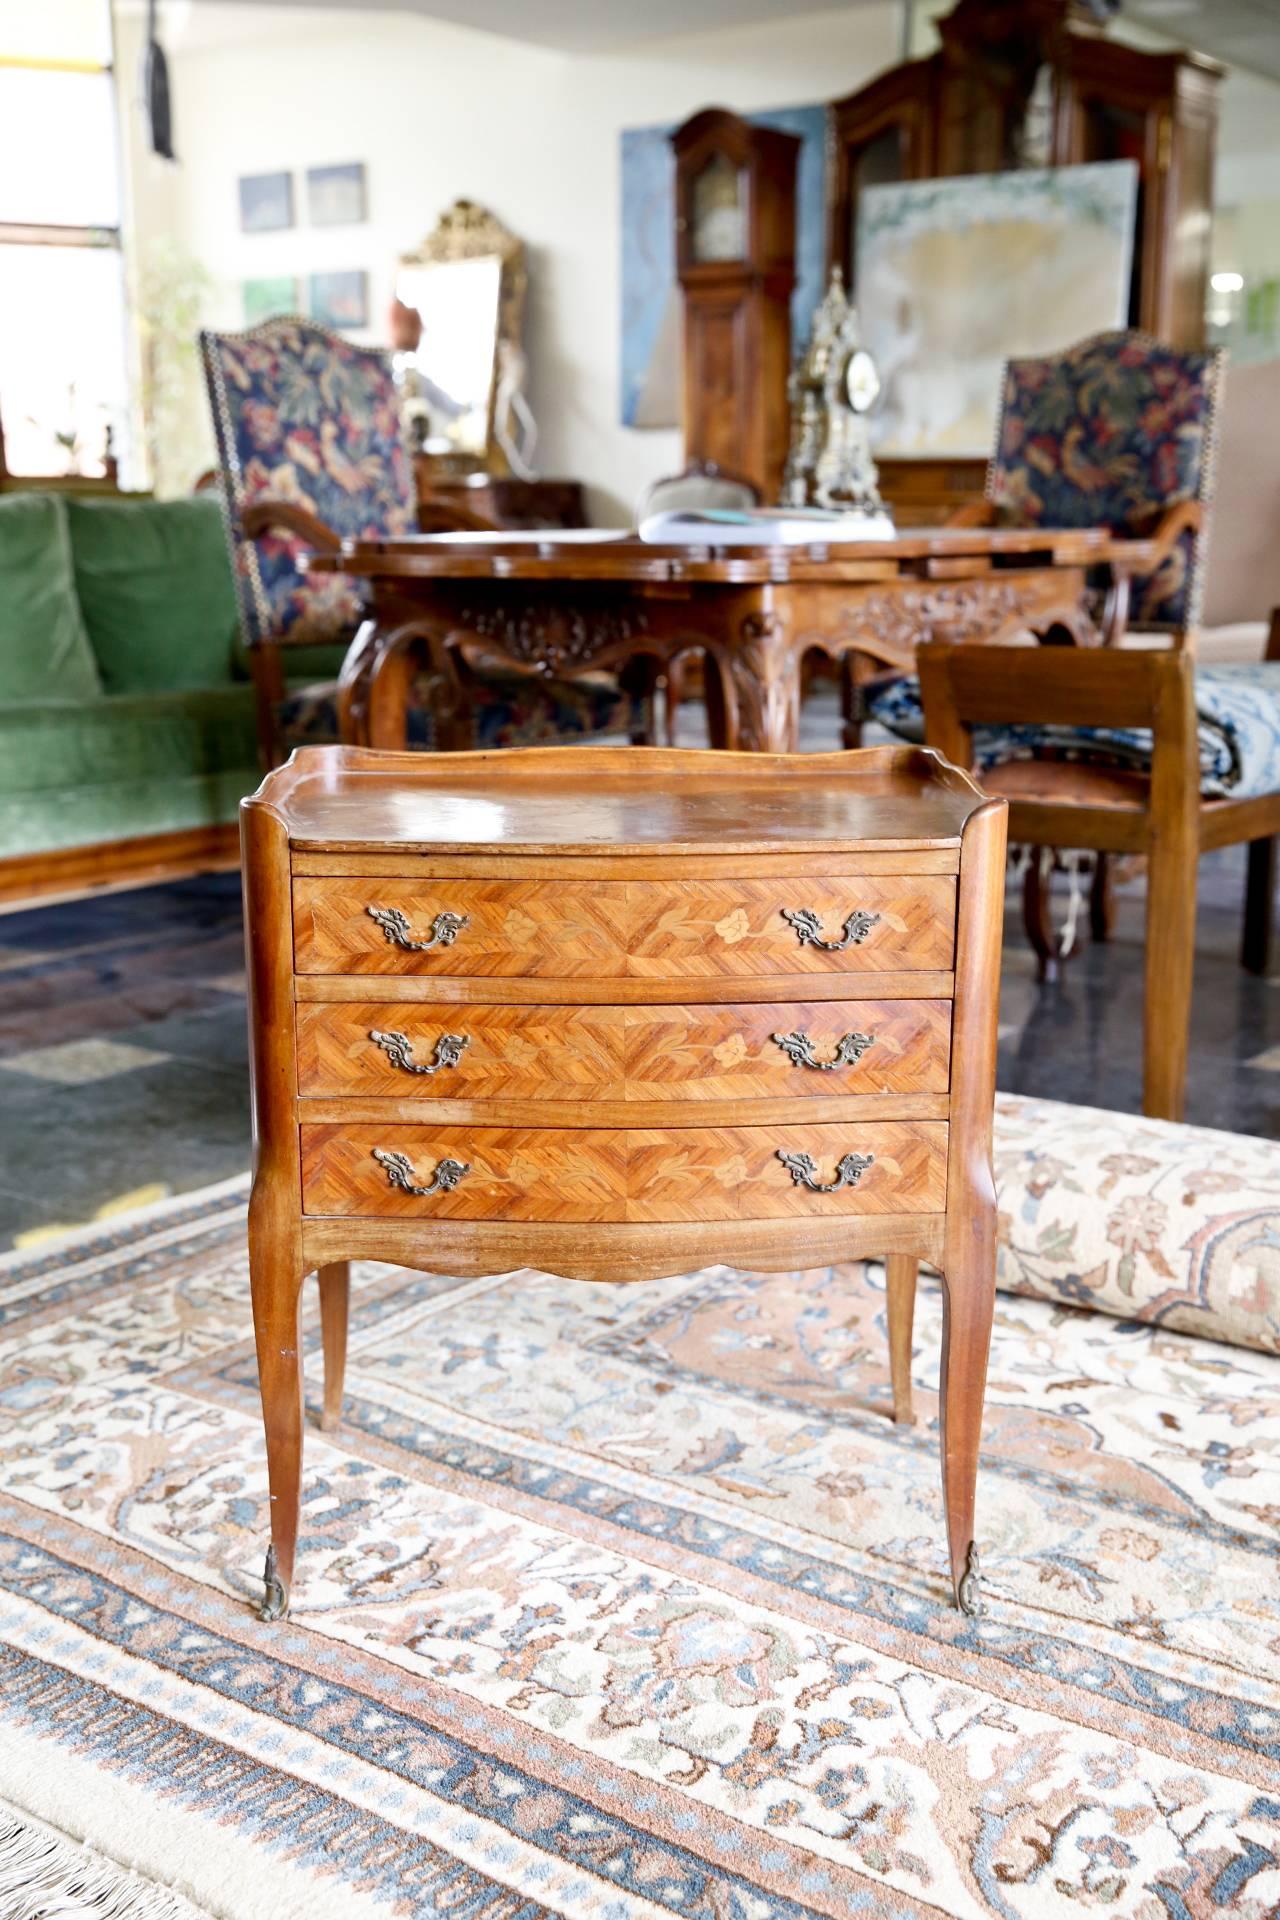 19th century Louis XVI style three-drawer petite commode from Paris, circa 1860. This commode is made from kingwood and features exquisite floral marquetry decoration at front and on the top and original bronze handles and nice ornaments on the